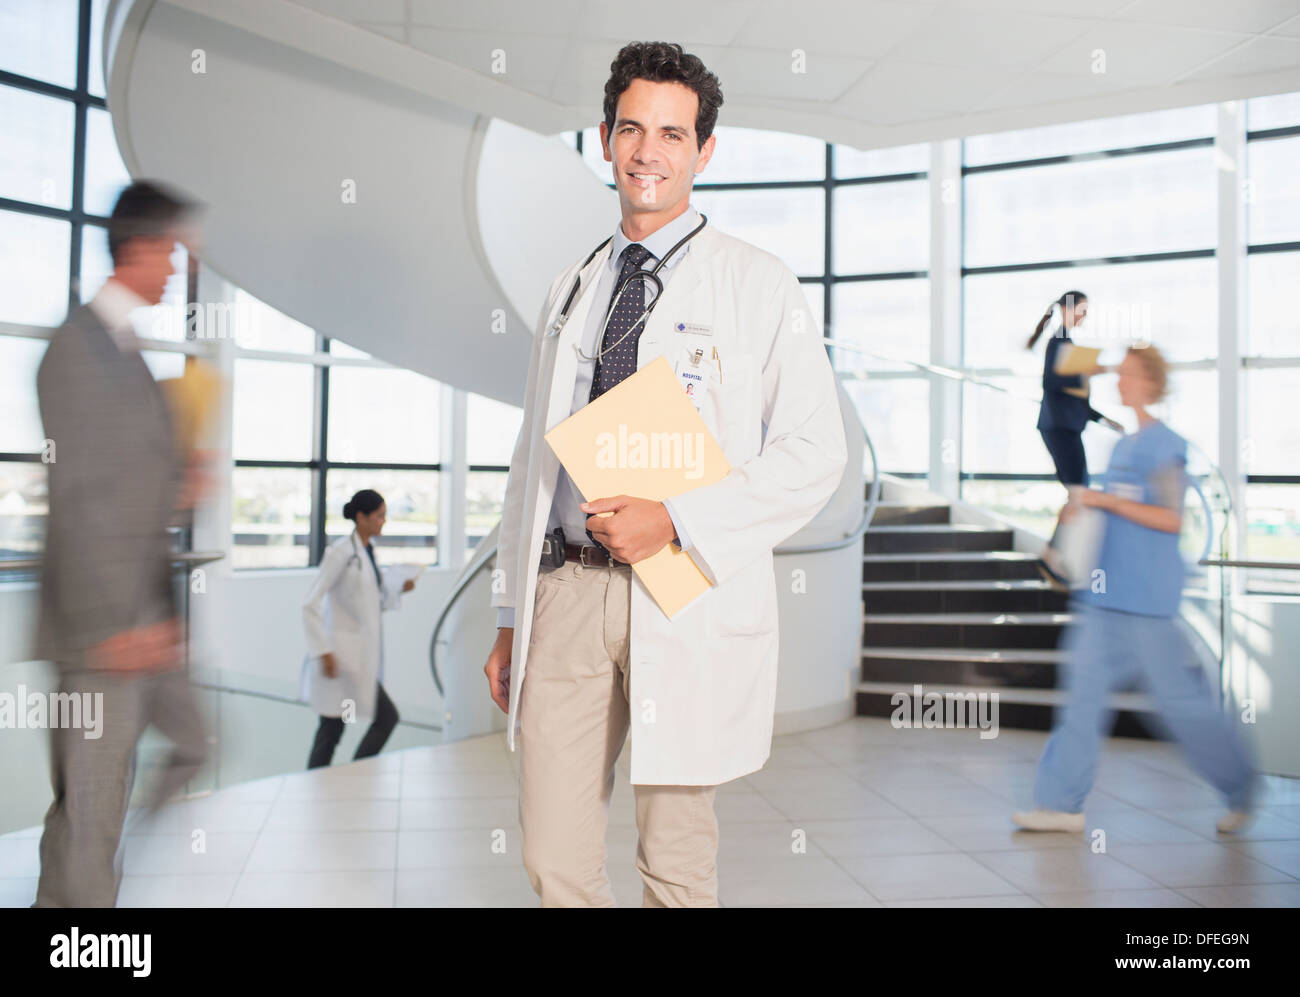 Doctor carrying folders in hospital Stock Photo